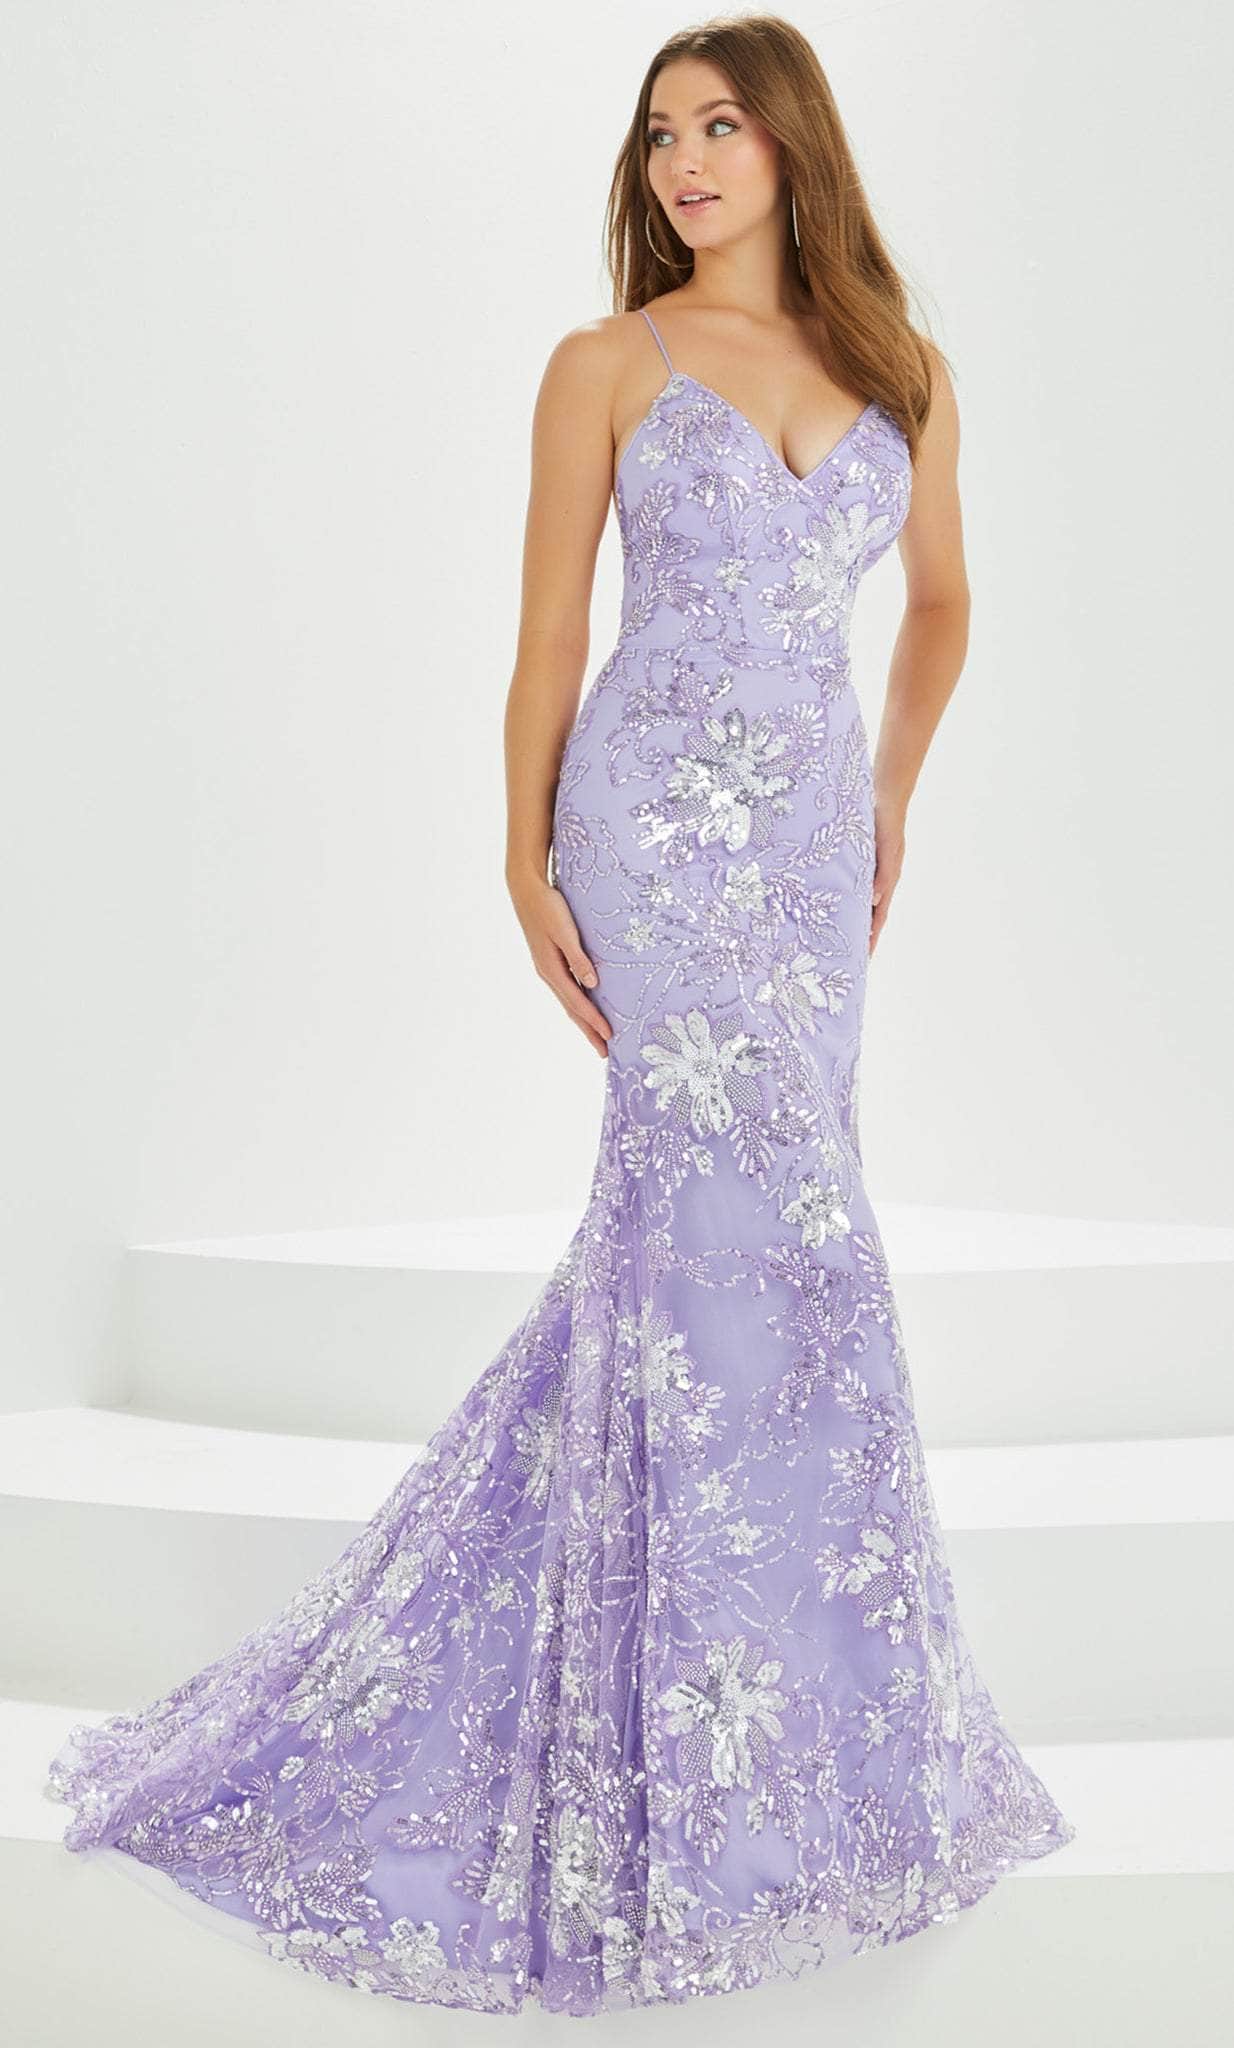 Image of Tiffany Designs by Christina Wu 16026 - Sequined Lace Prom Gown